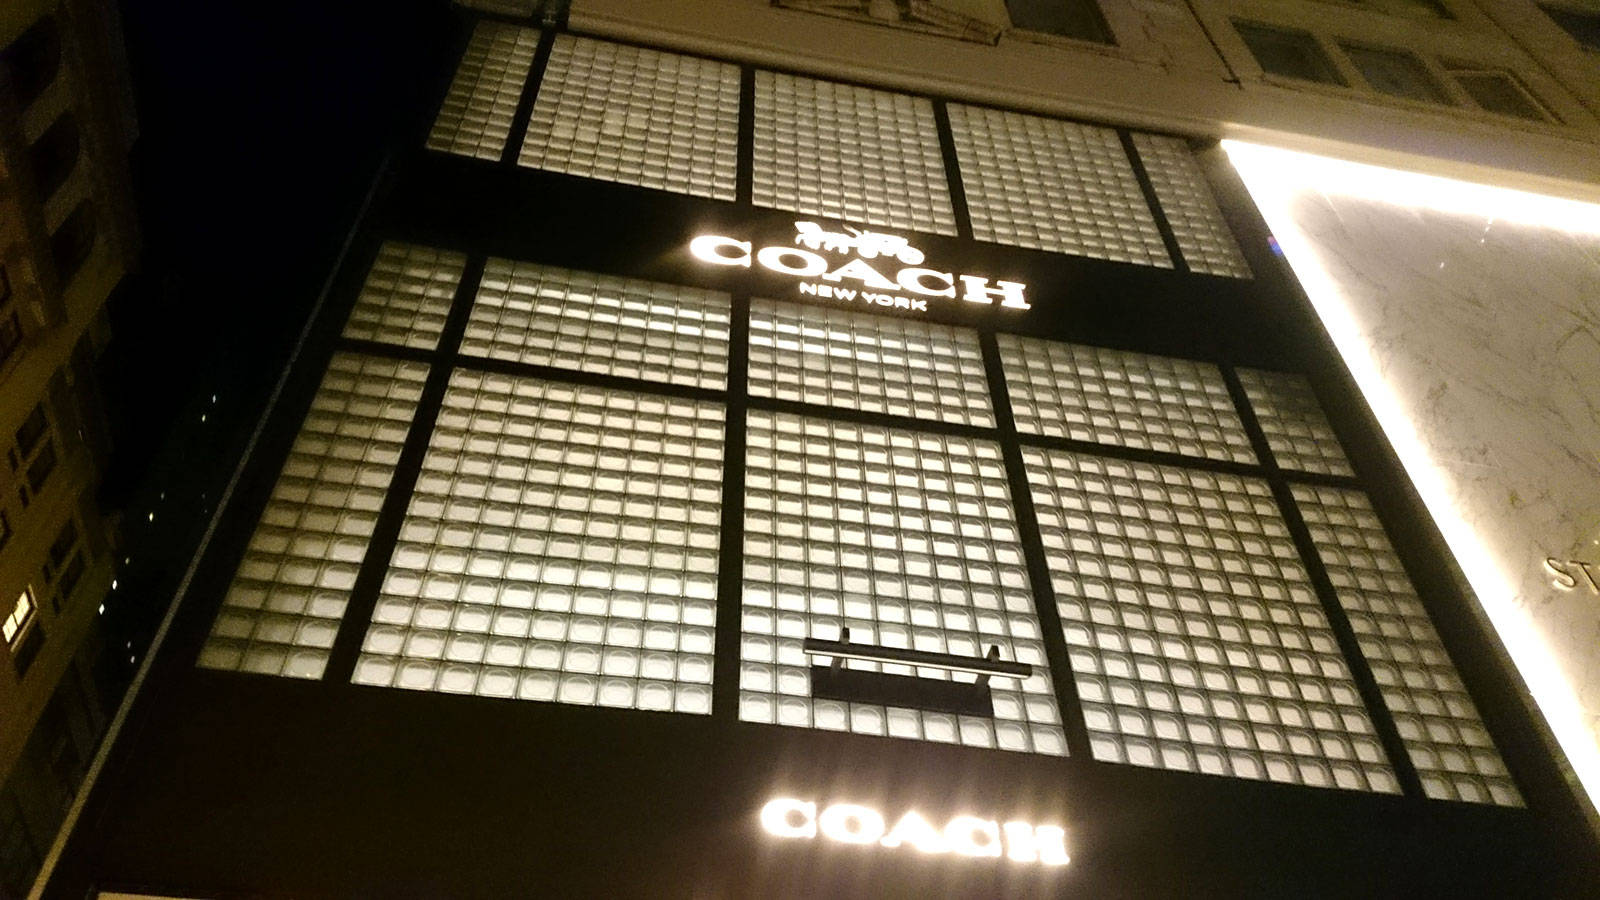 Coach Led Signage On Building Wallpaper